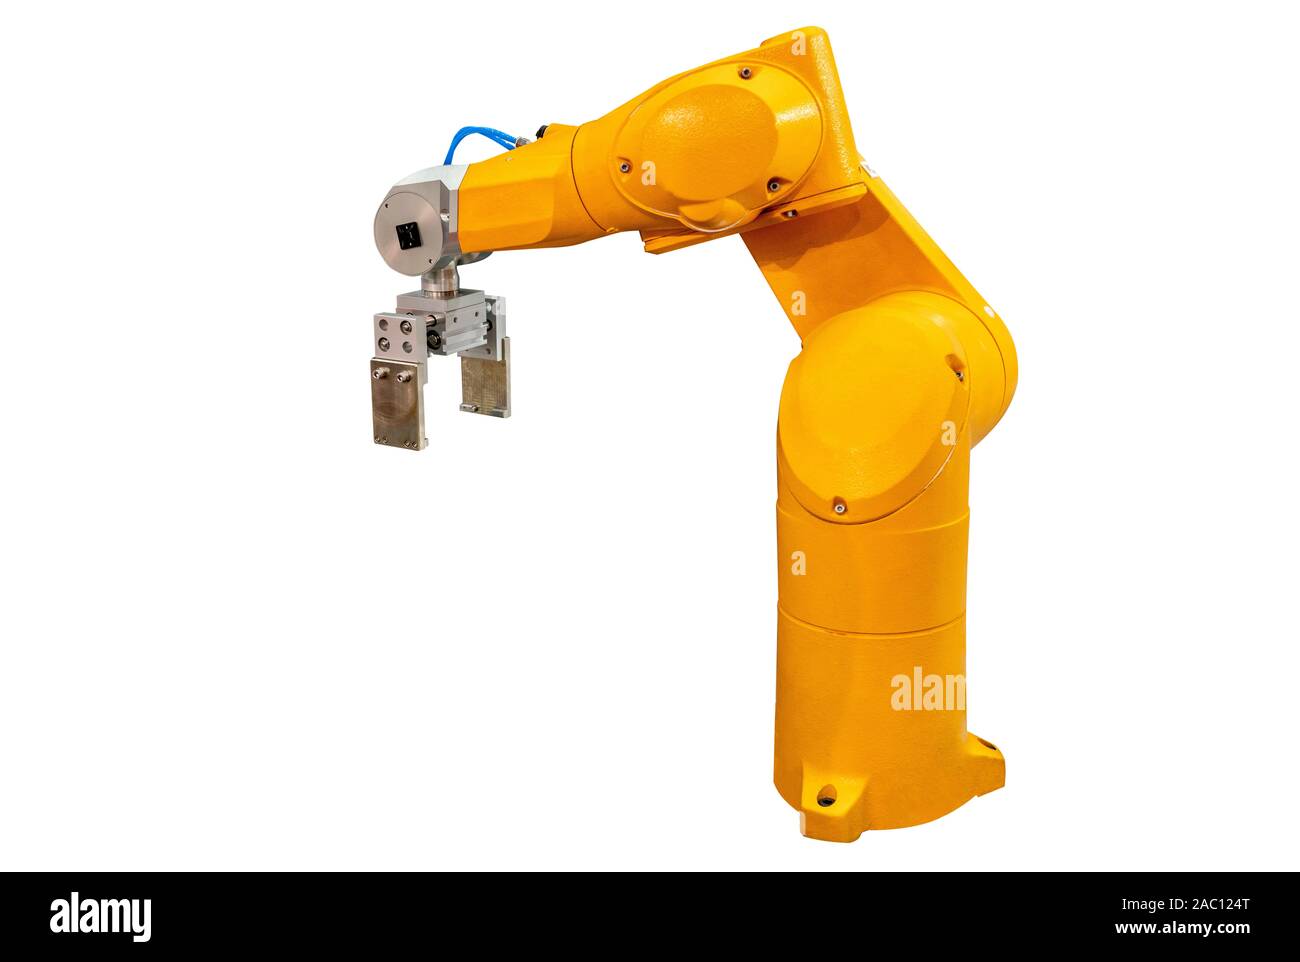 Isolated robot arm machine for industry manufacture operation on white background. Stock Photo